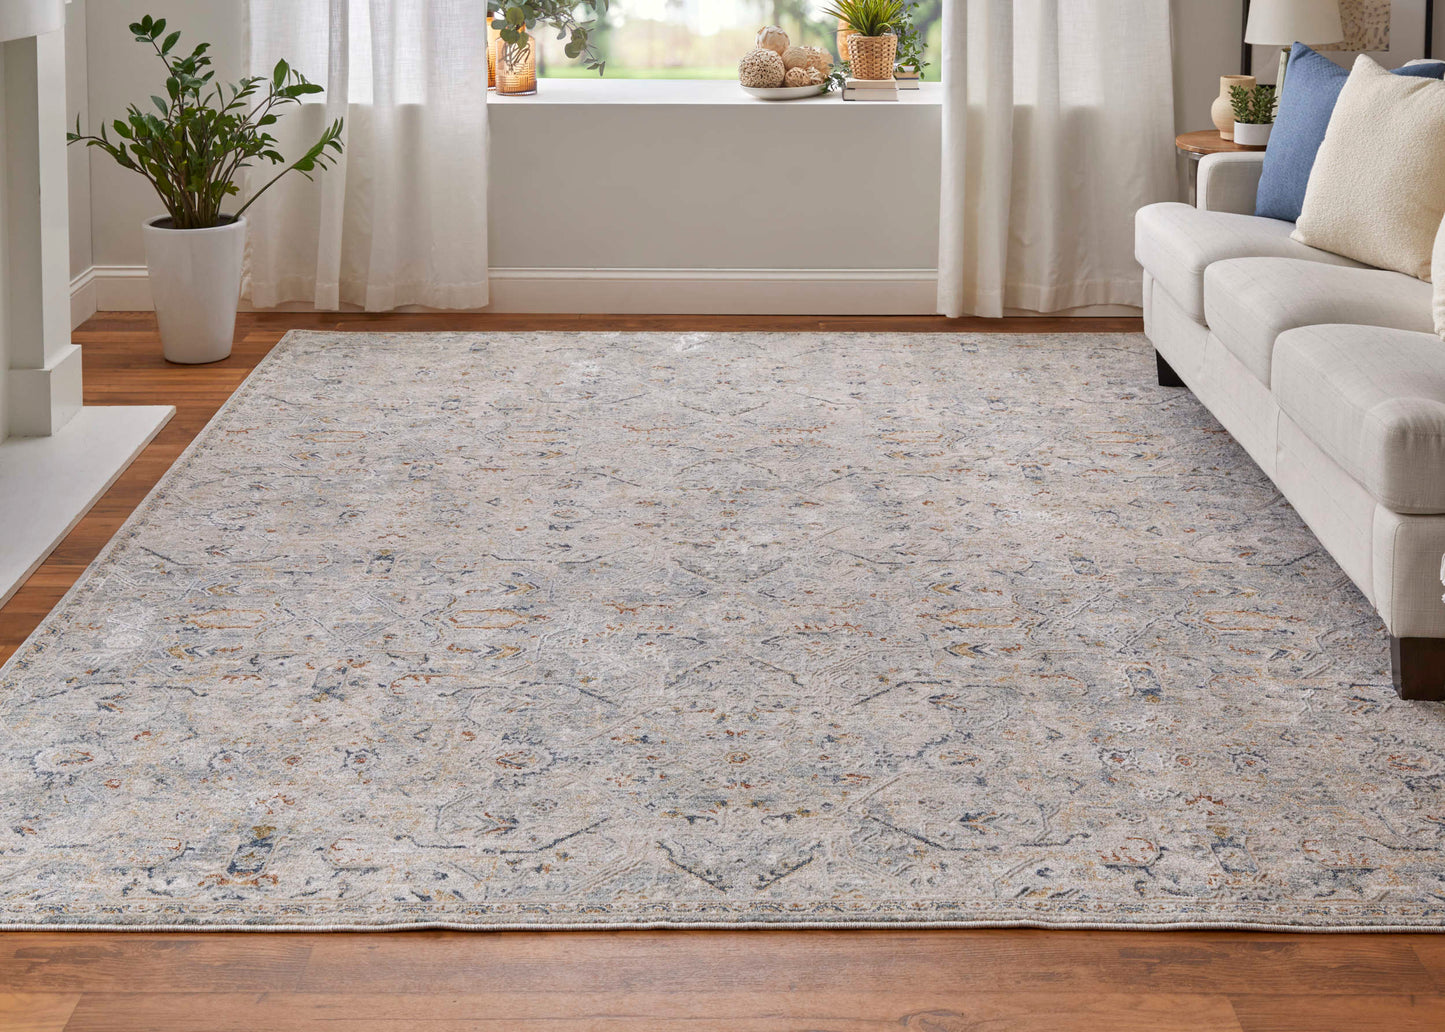 Feizy Pasha 39M6F Ivory Transitional/Bohemian & Eclect Machinemade Rug